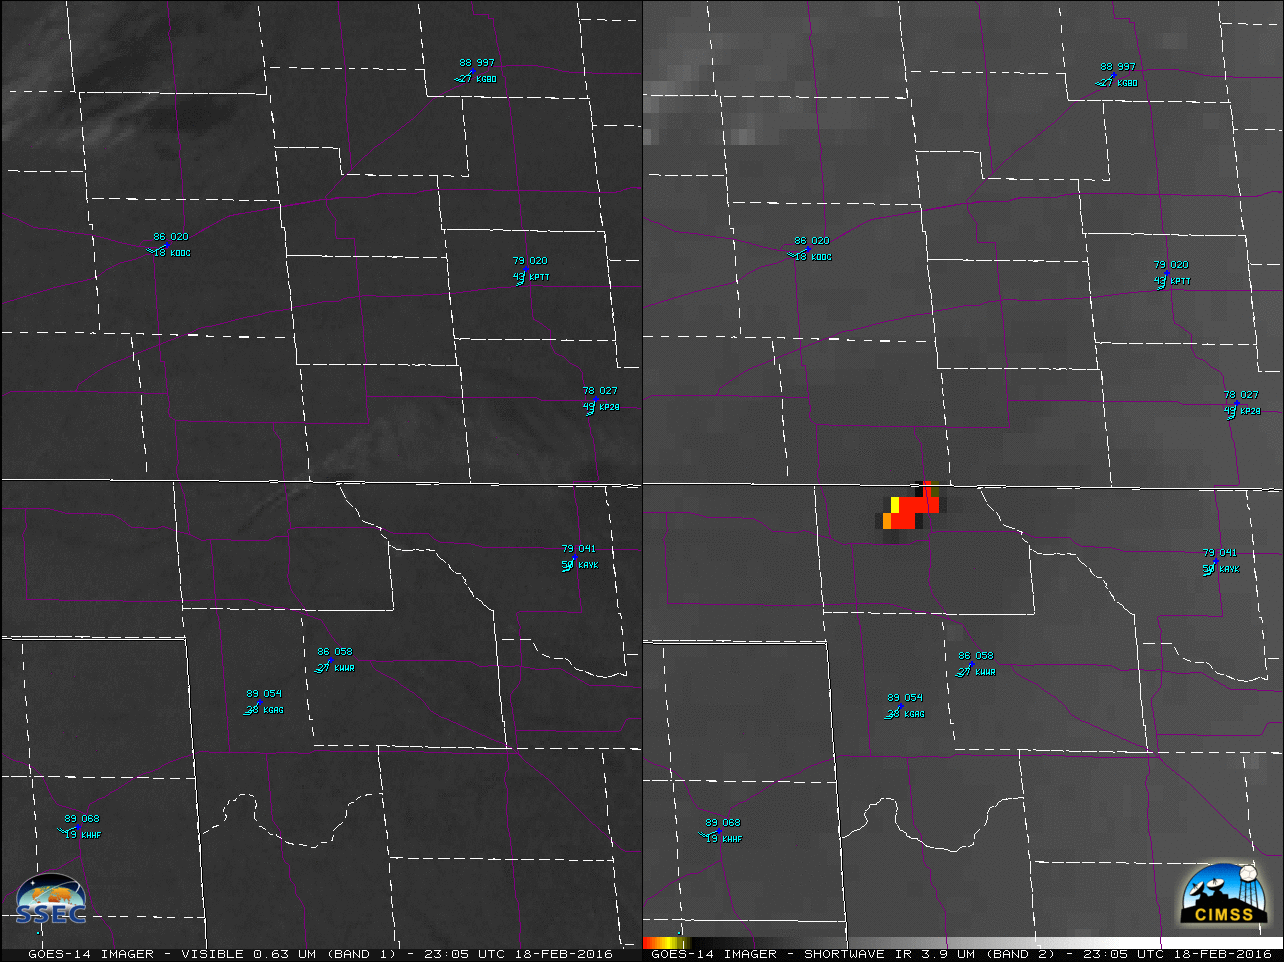 GOES-14 0.63 µm Visible (left) and 3.9 µm Shortwave Infrared (right) images [click to play MP4 animation]